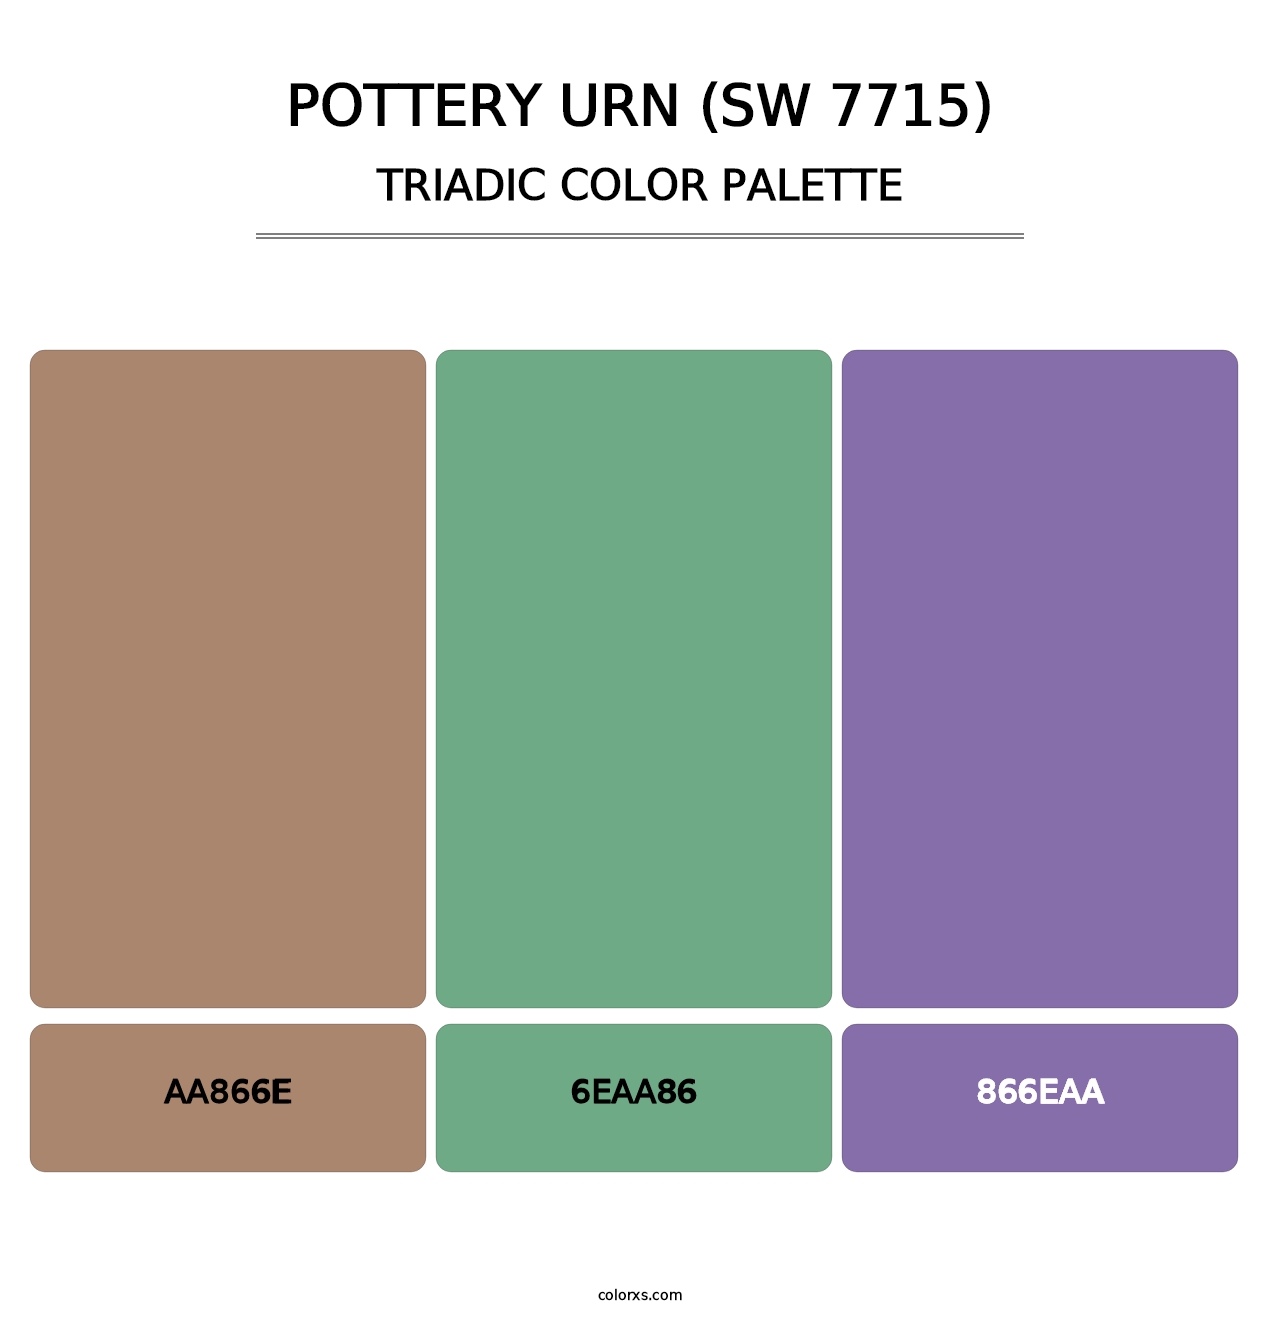 Pottery Urn (SW 7715) - Triadic Color Palette